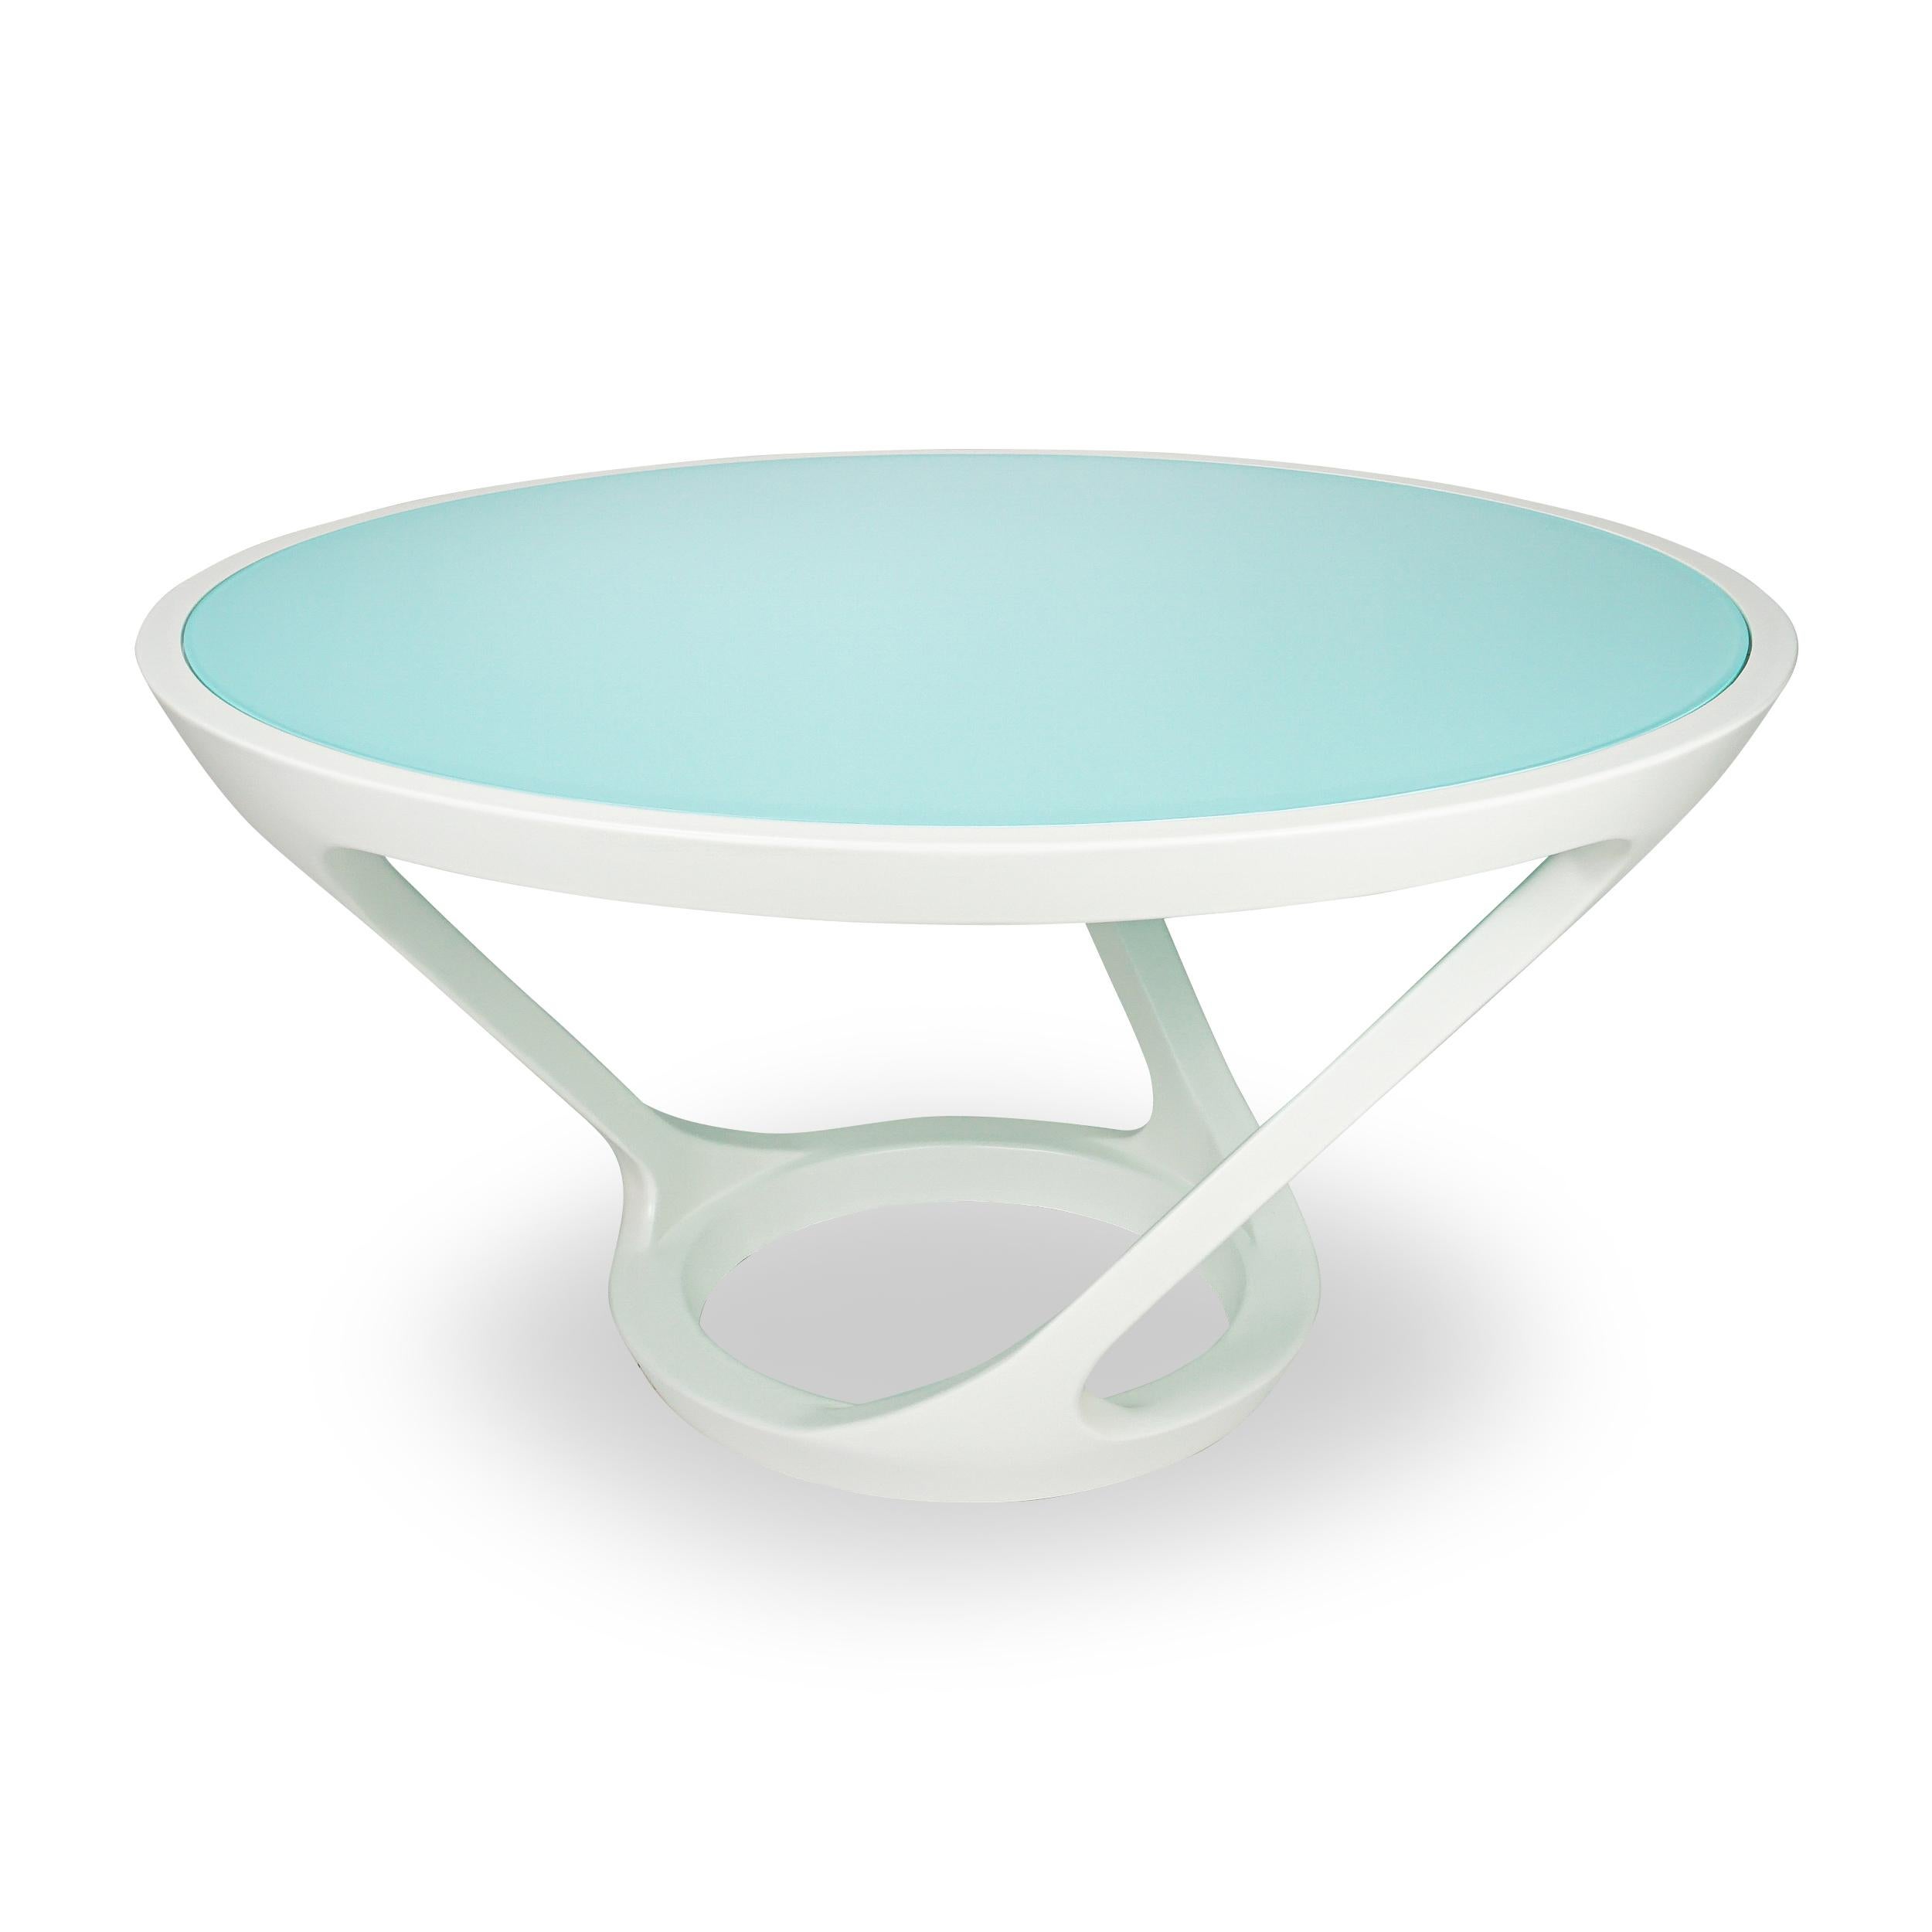 American Modern Jamaican Aqua Glass Inset and White Lacquer Dining Table   For Sale